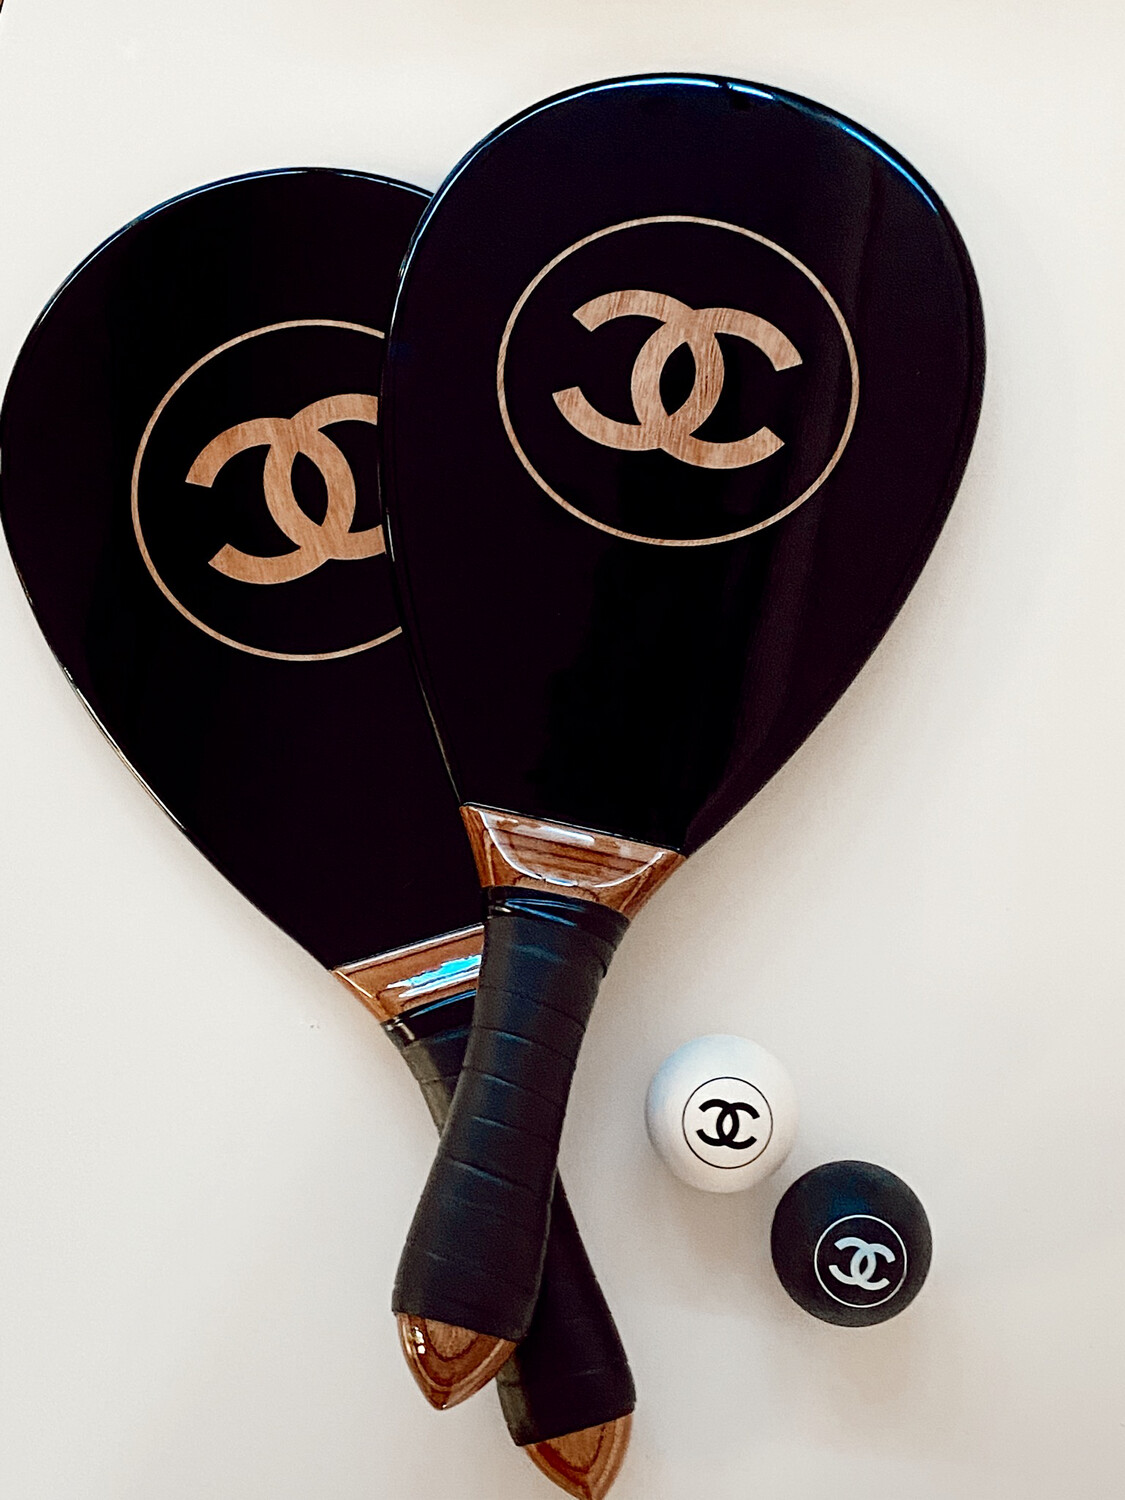 RARE VINTAGE CHANEL CC PING PONG SET WITH BOX